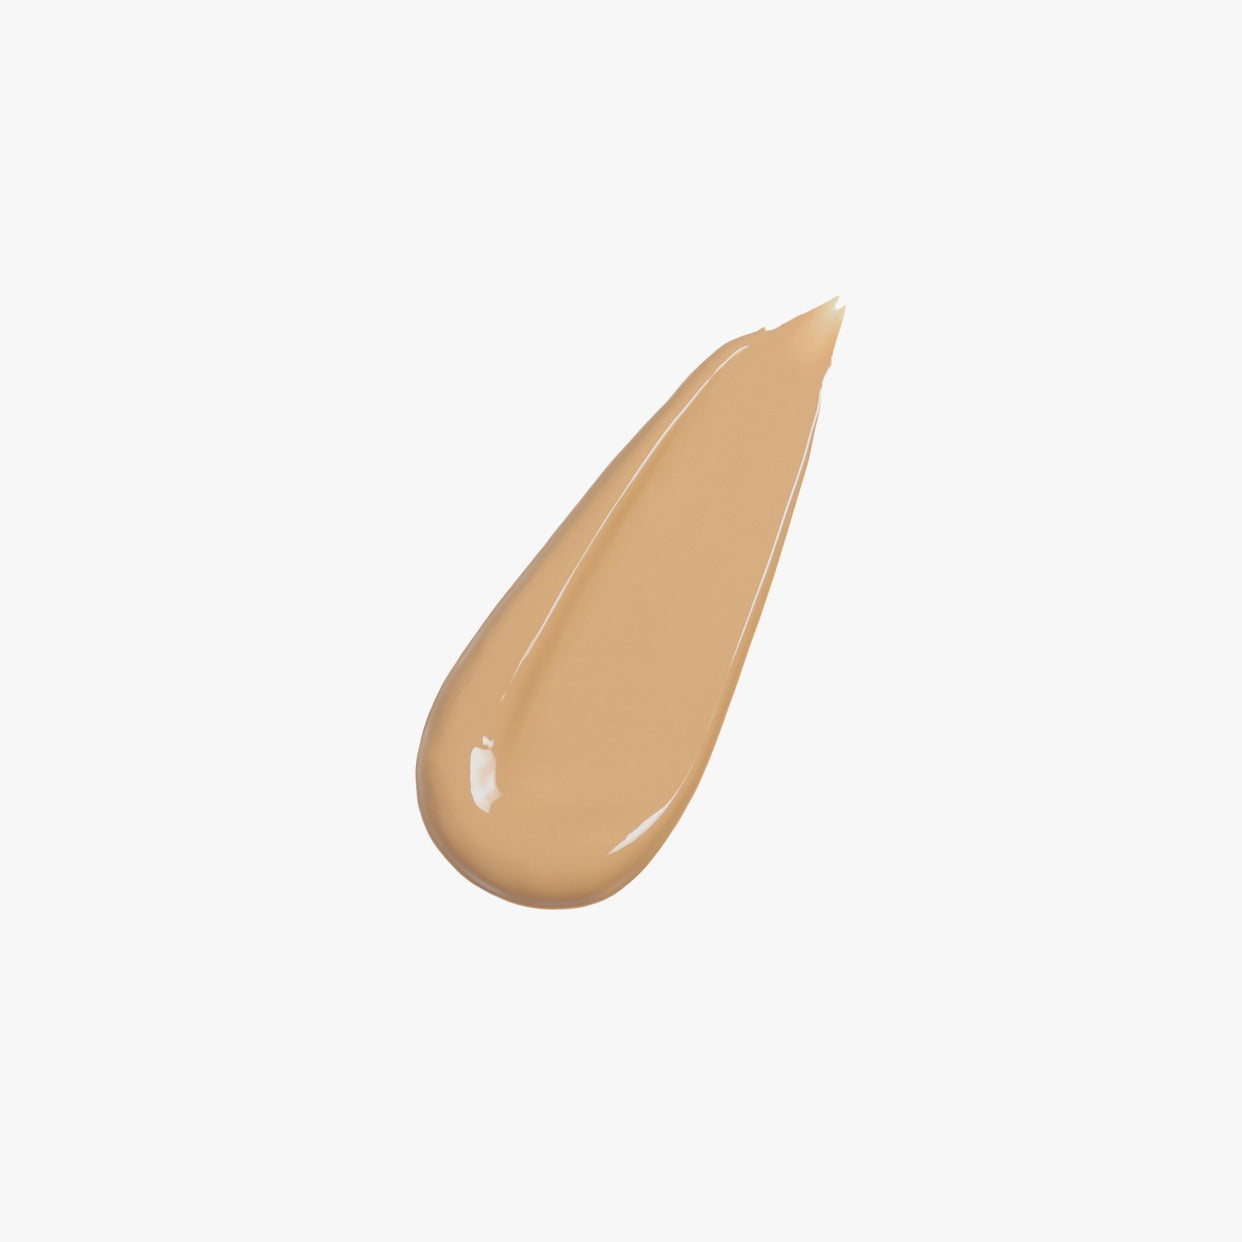 HUDA BEAUTY #FauxFilter Luminous matte Foundation - TOASTED COCONUT 240N